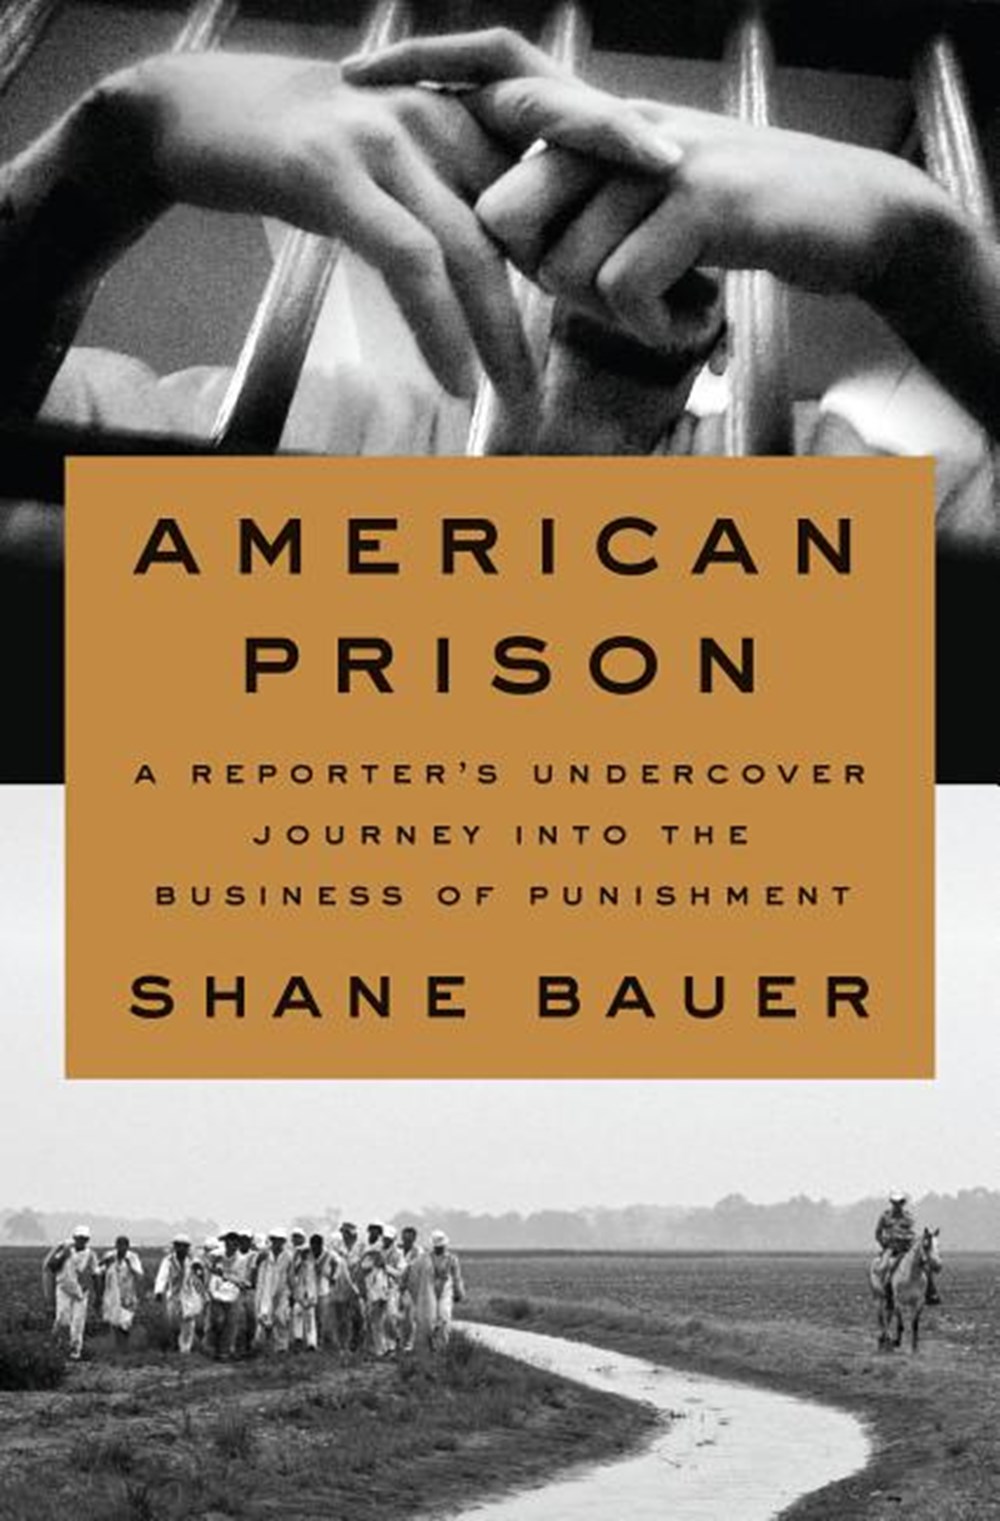 American Prison A Reporter's Undercover Journey into the Business of Punishment